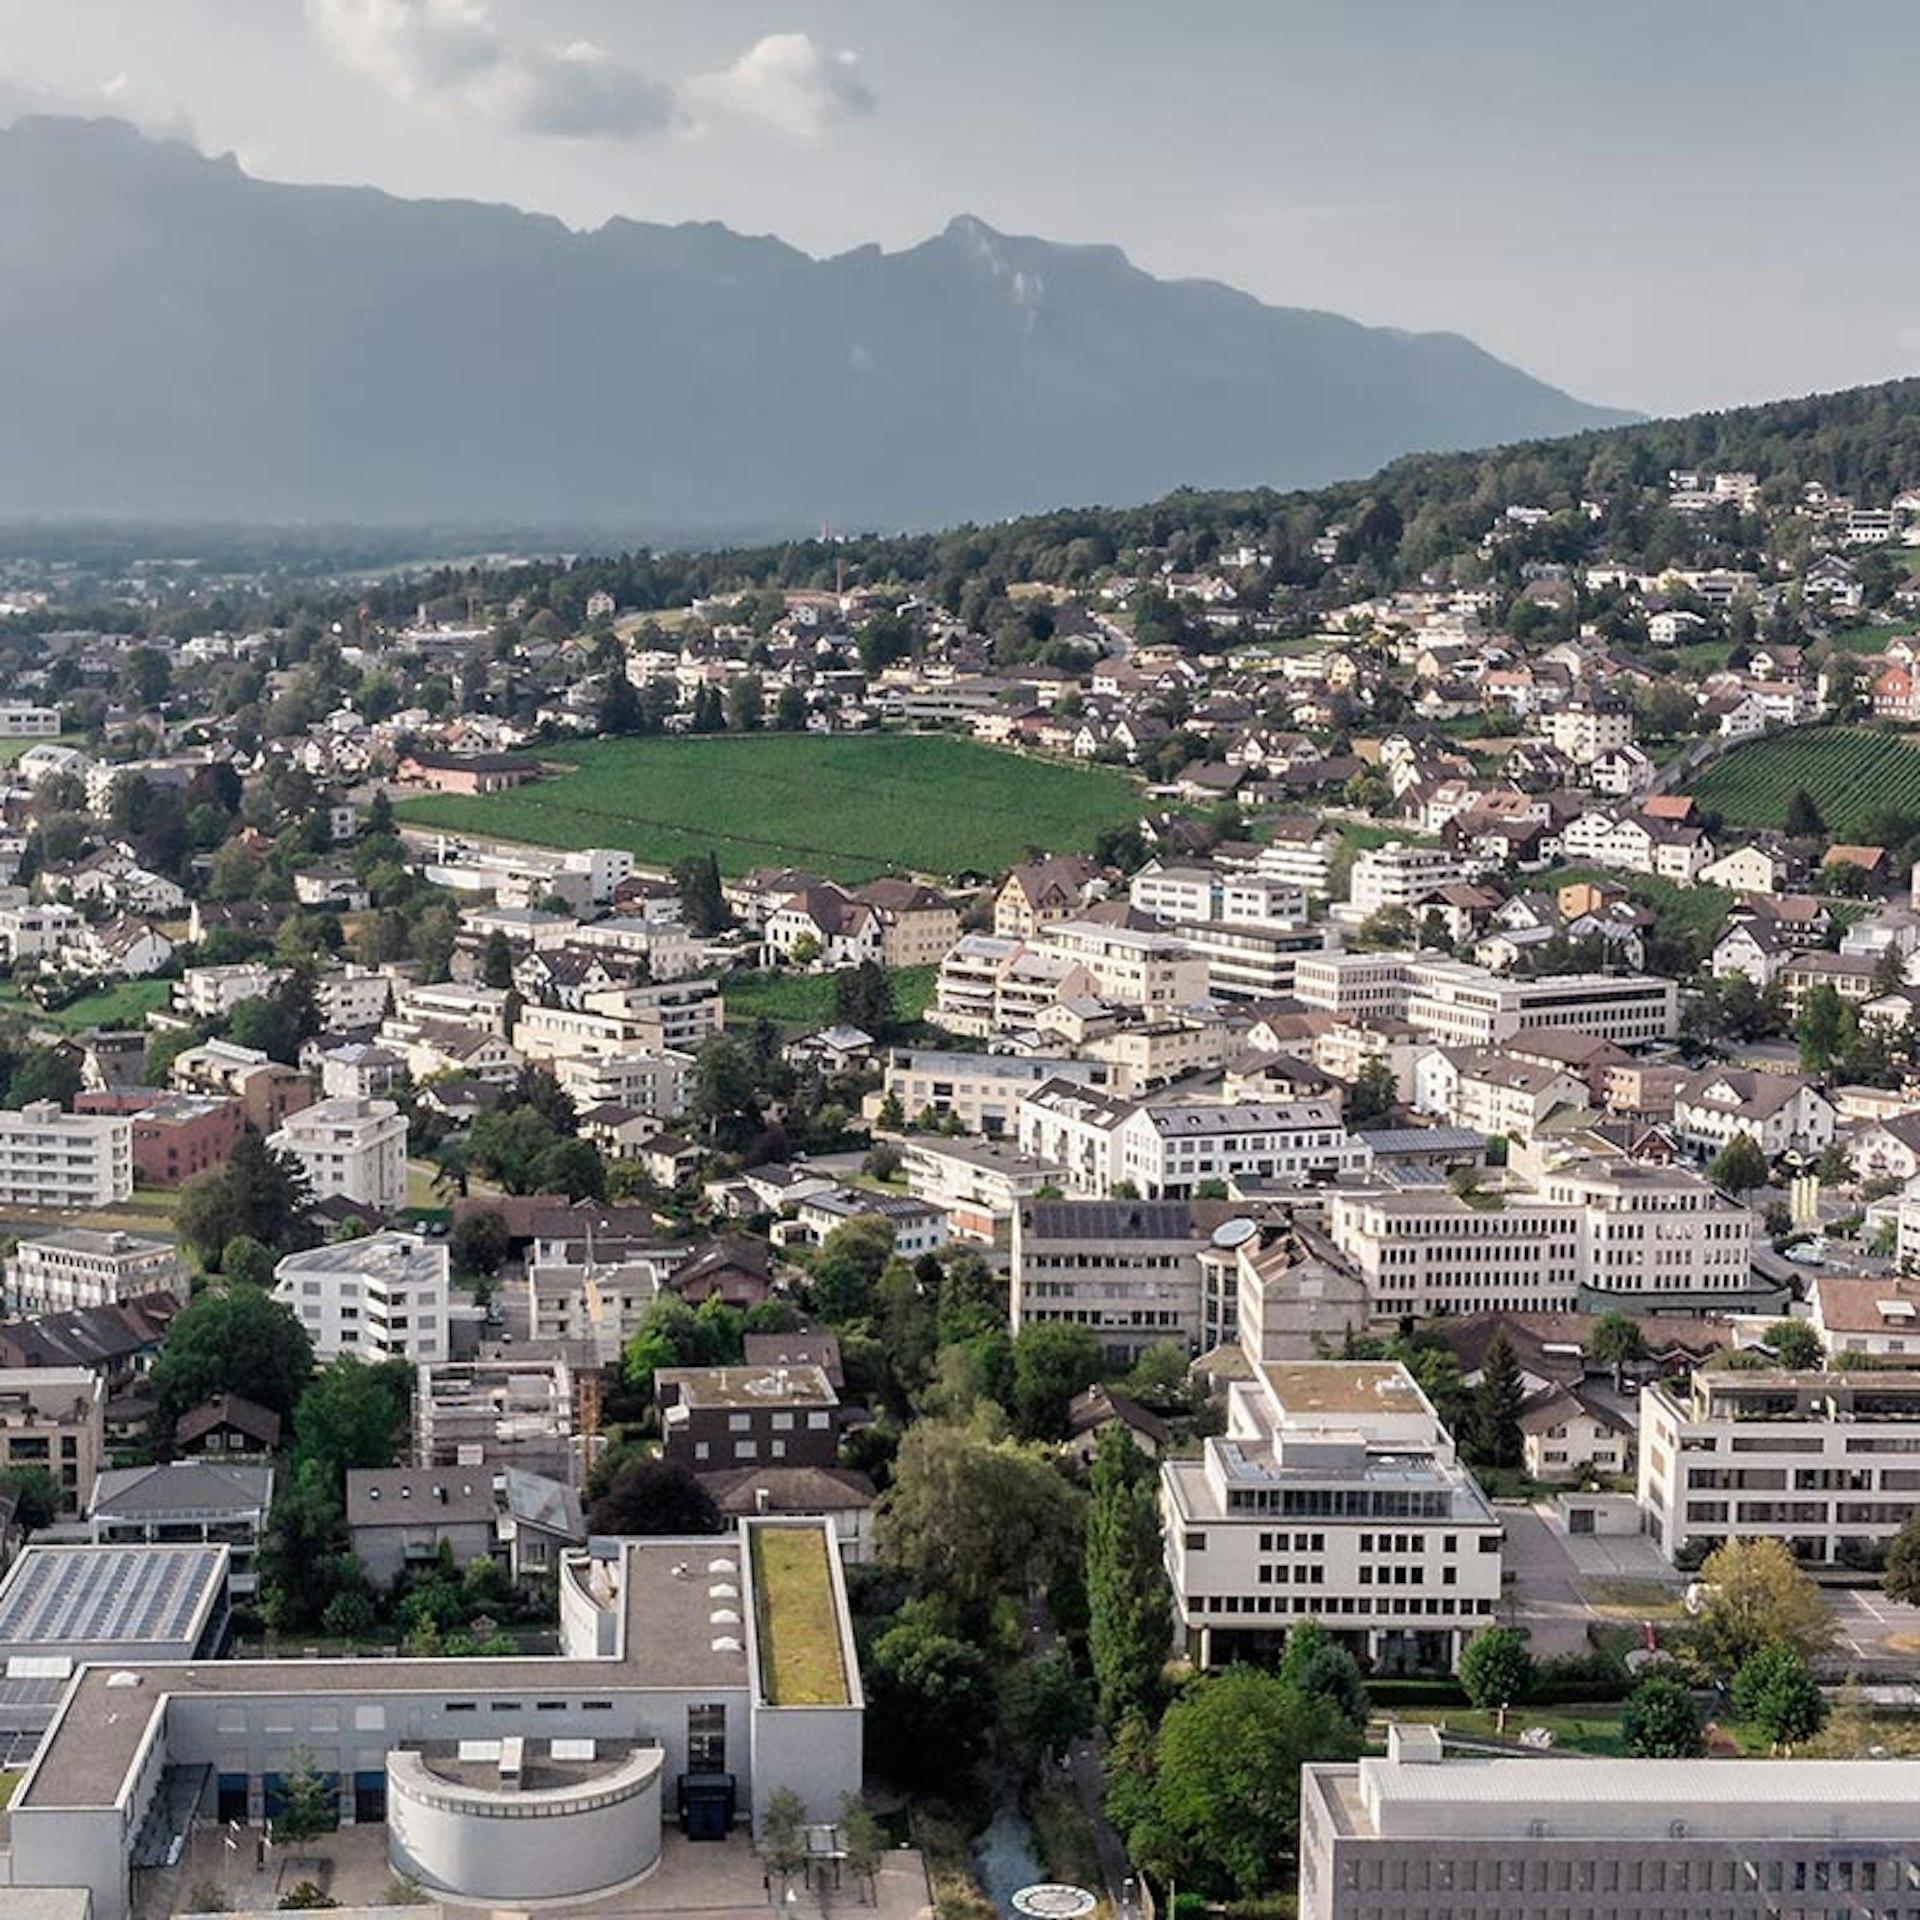 Get the latest news and updates on e-invoicing, e-ordering, e-archiving and indirect tax regulatory requirements for Liechtenstein.